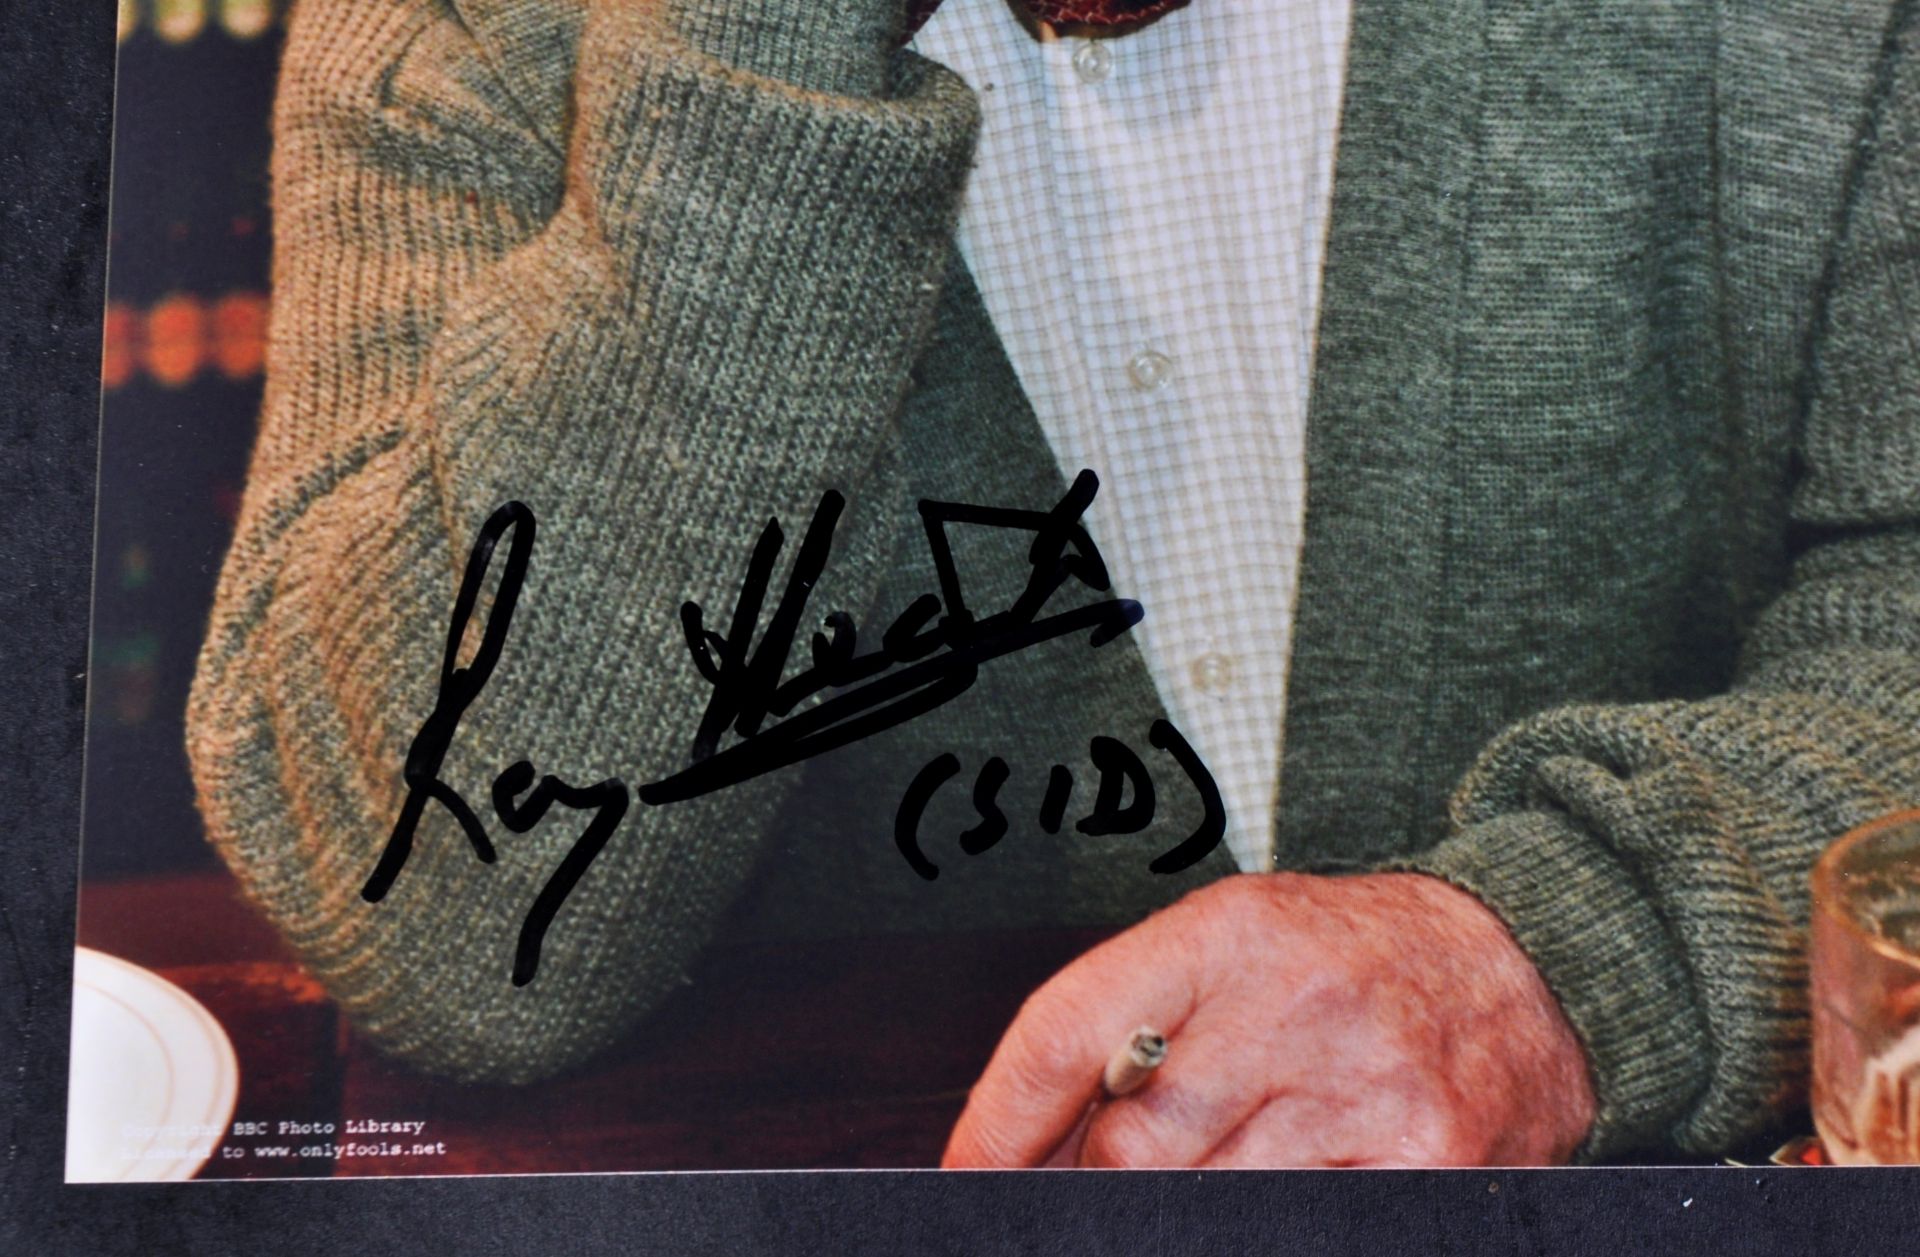 ONLY FOOLS & HORSES - SID - ROY HEATHER - SIGNED PHOTOGRAPH - Image 2 of 2